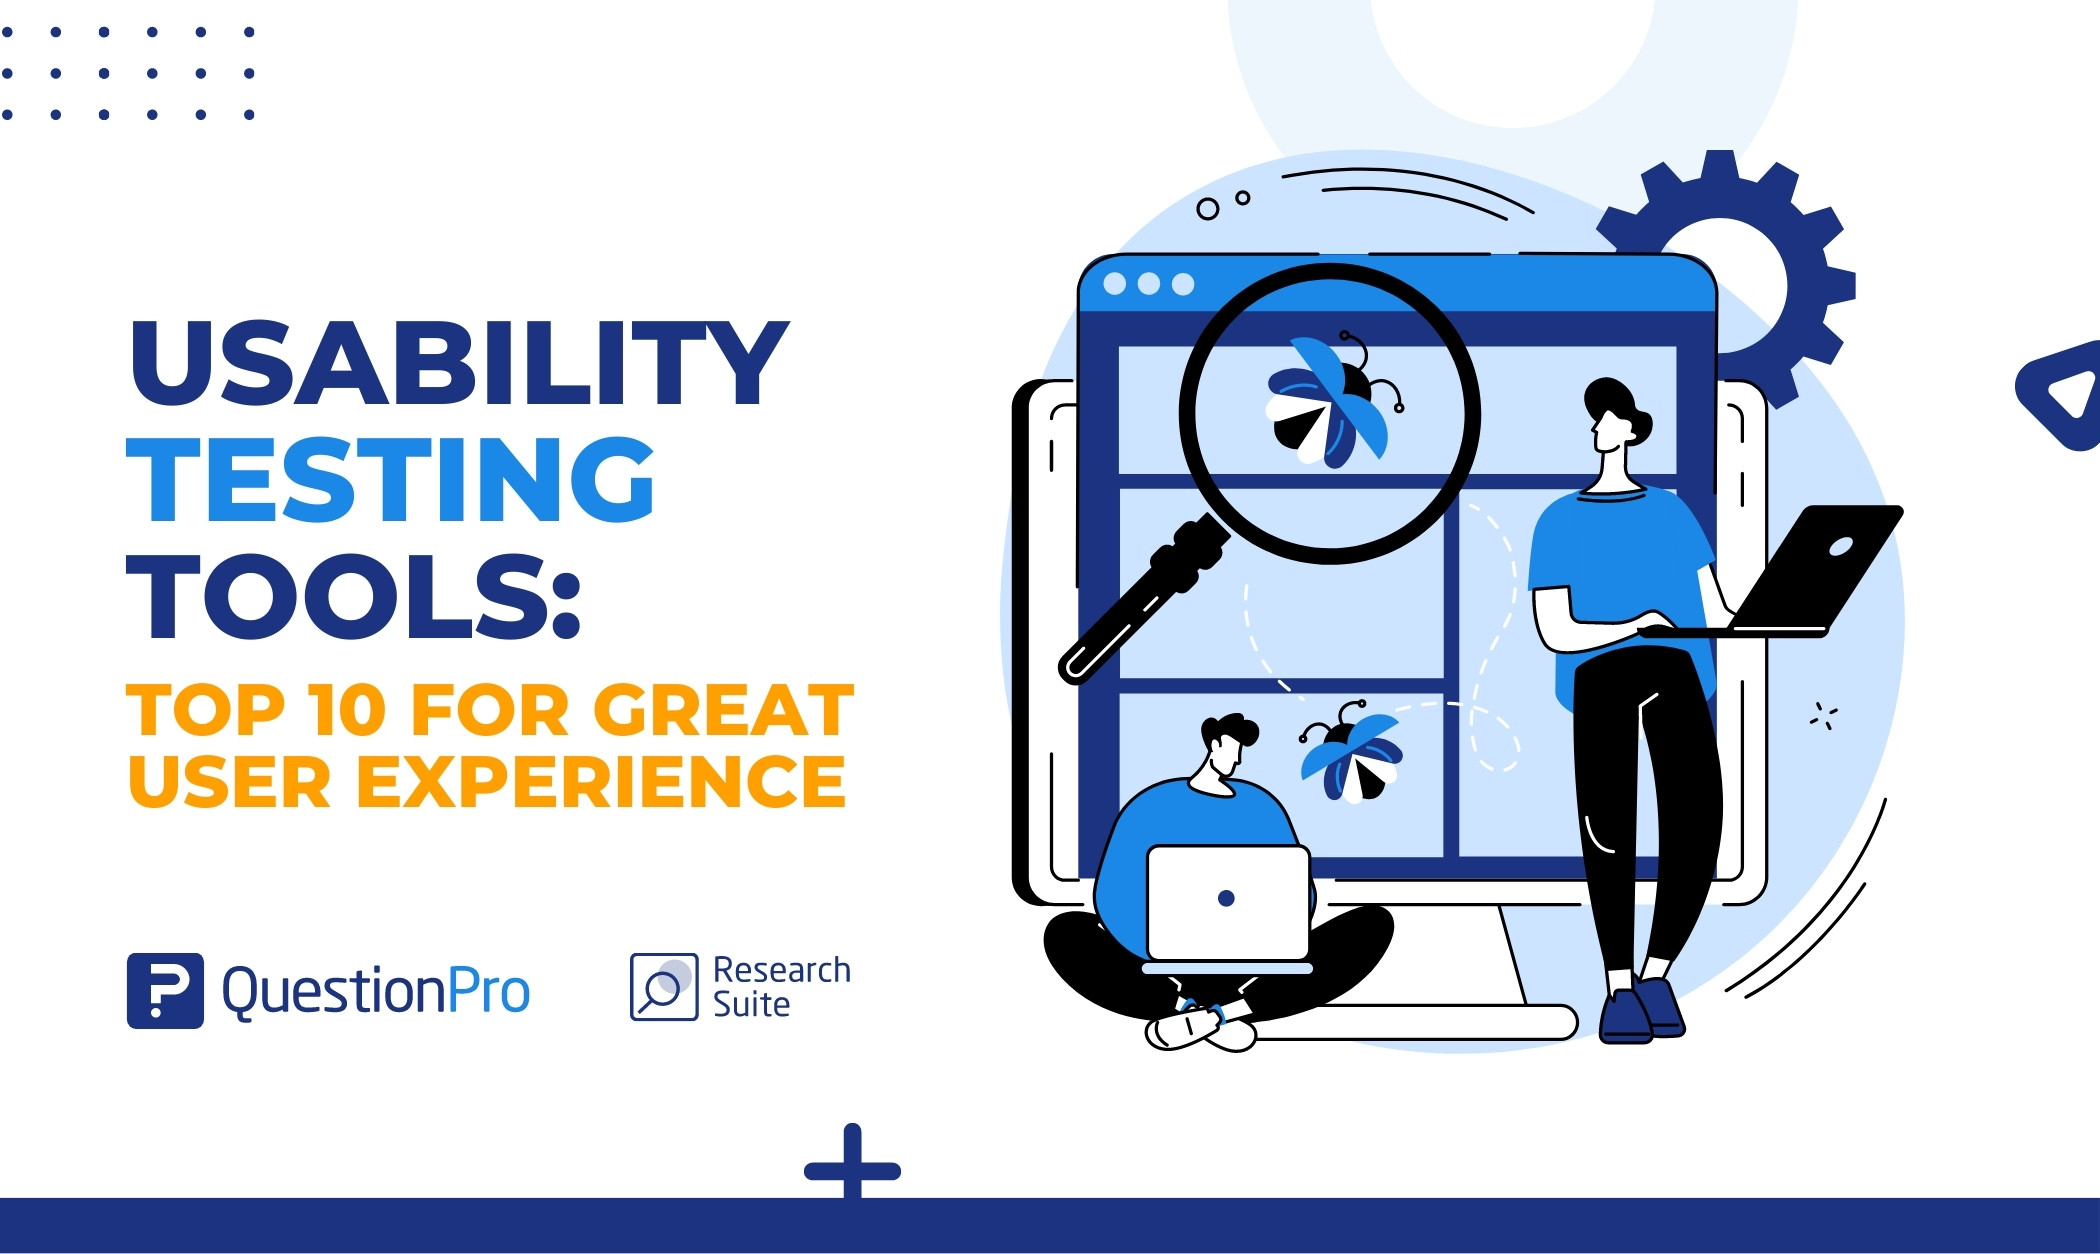 Improve your testing process with the best tools available. Explore the top 10 usability testing tools & get the best value for your testing.